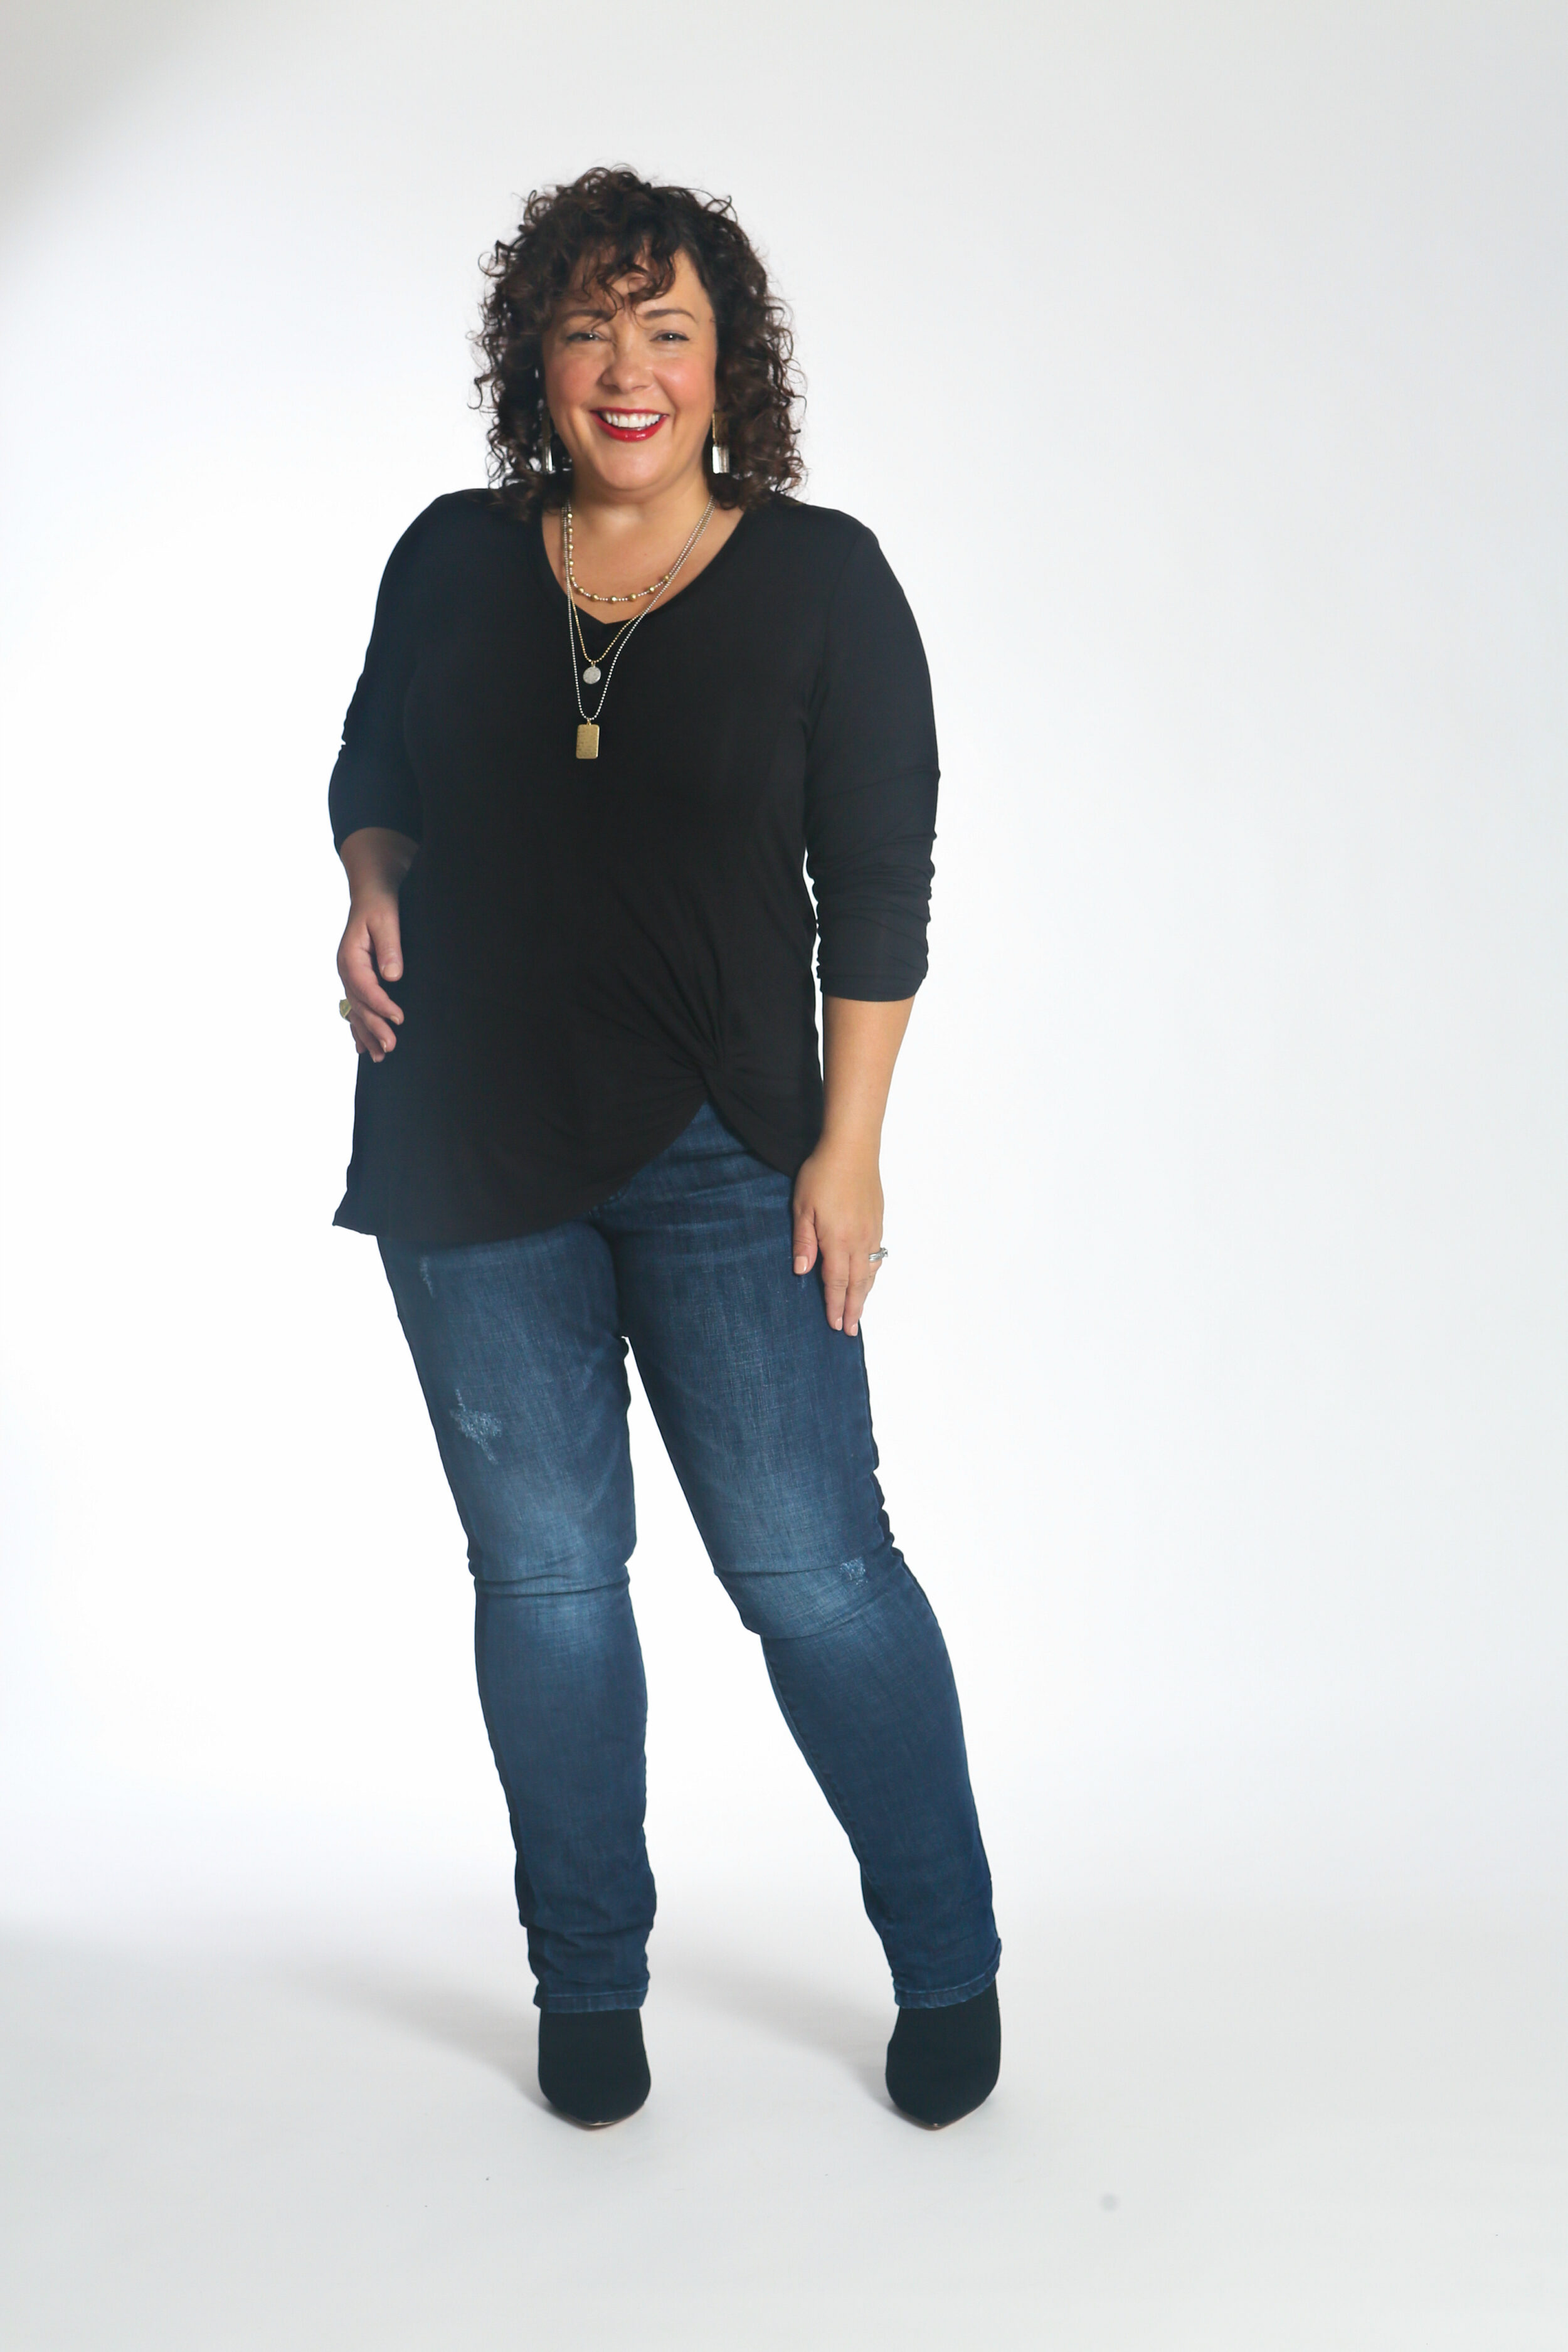 Wardrobe Oxygen in the cabi Reveal Tee and Tuxedo High Straight jeans